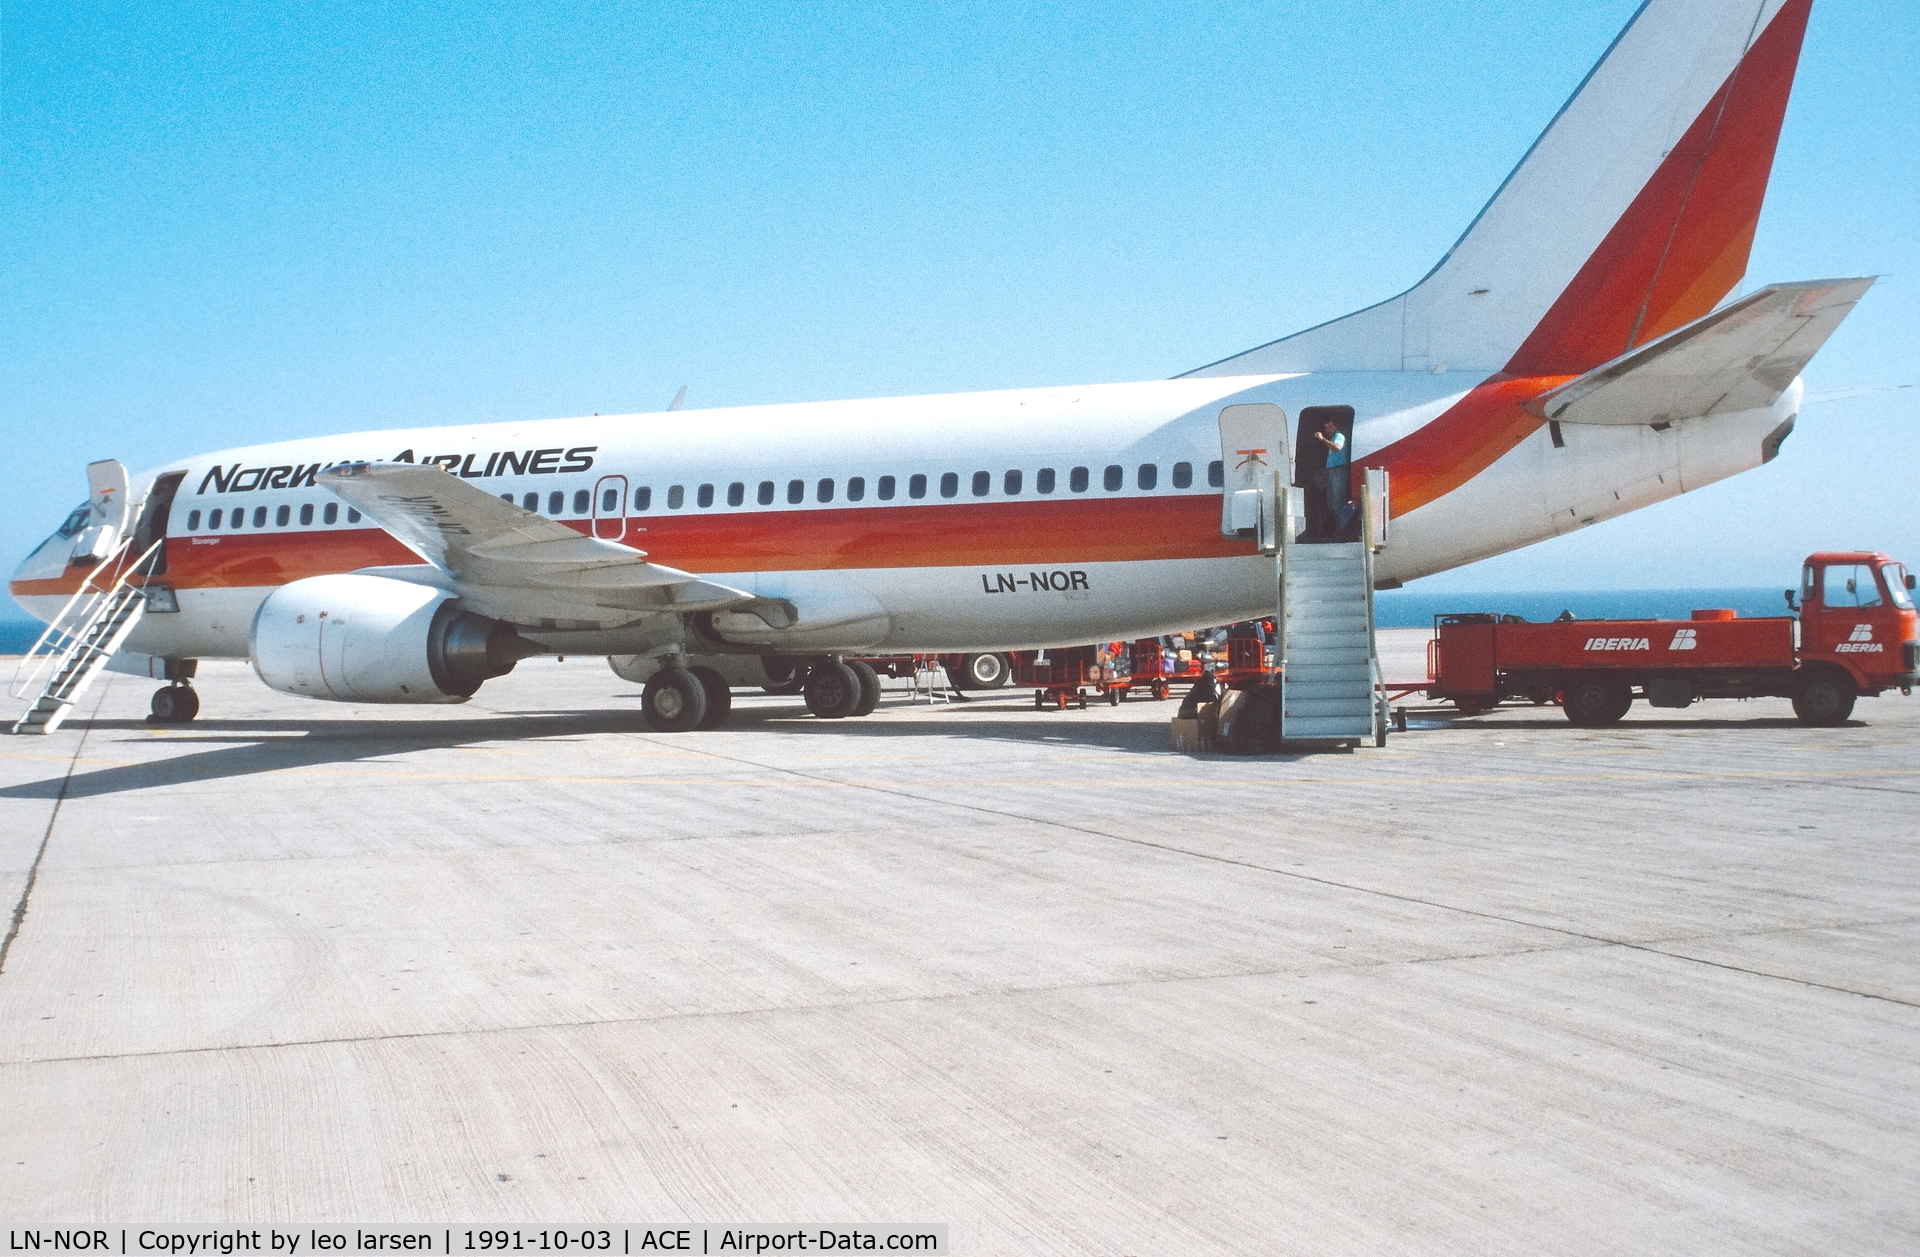 LN-NOR, 1987 Boeing 737-33A C/N 23827, Lanzarote 3.10.1991 Norway Airlines.ex Air Europa